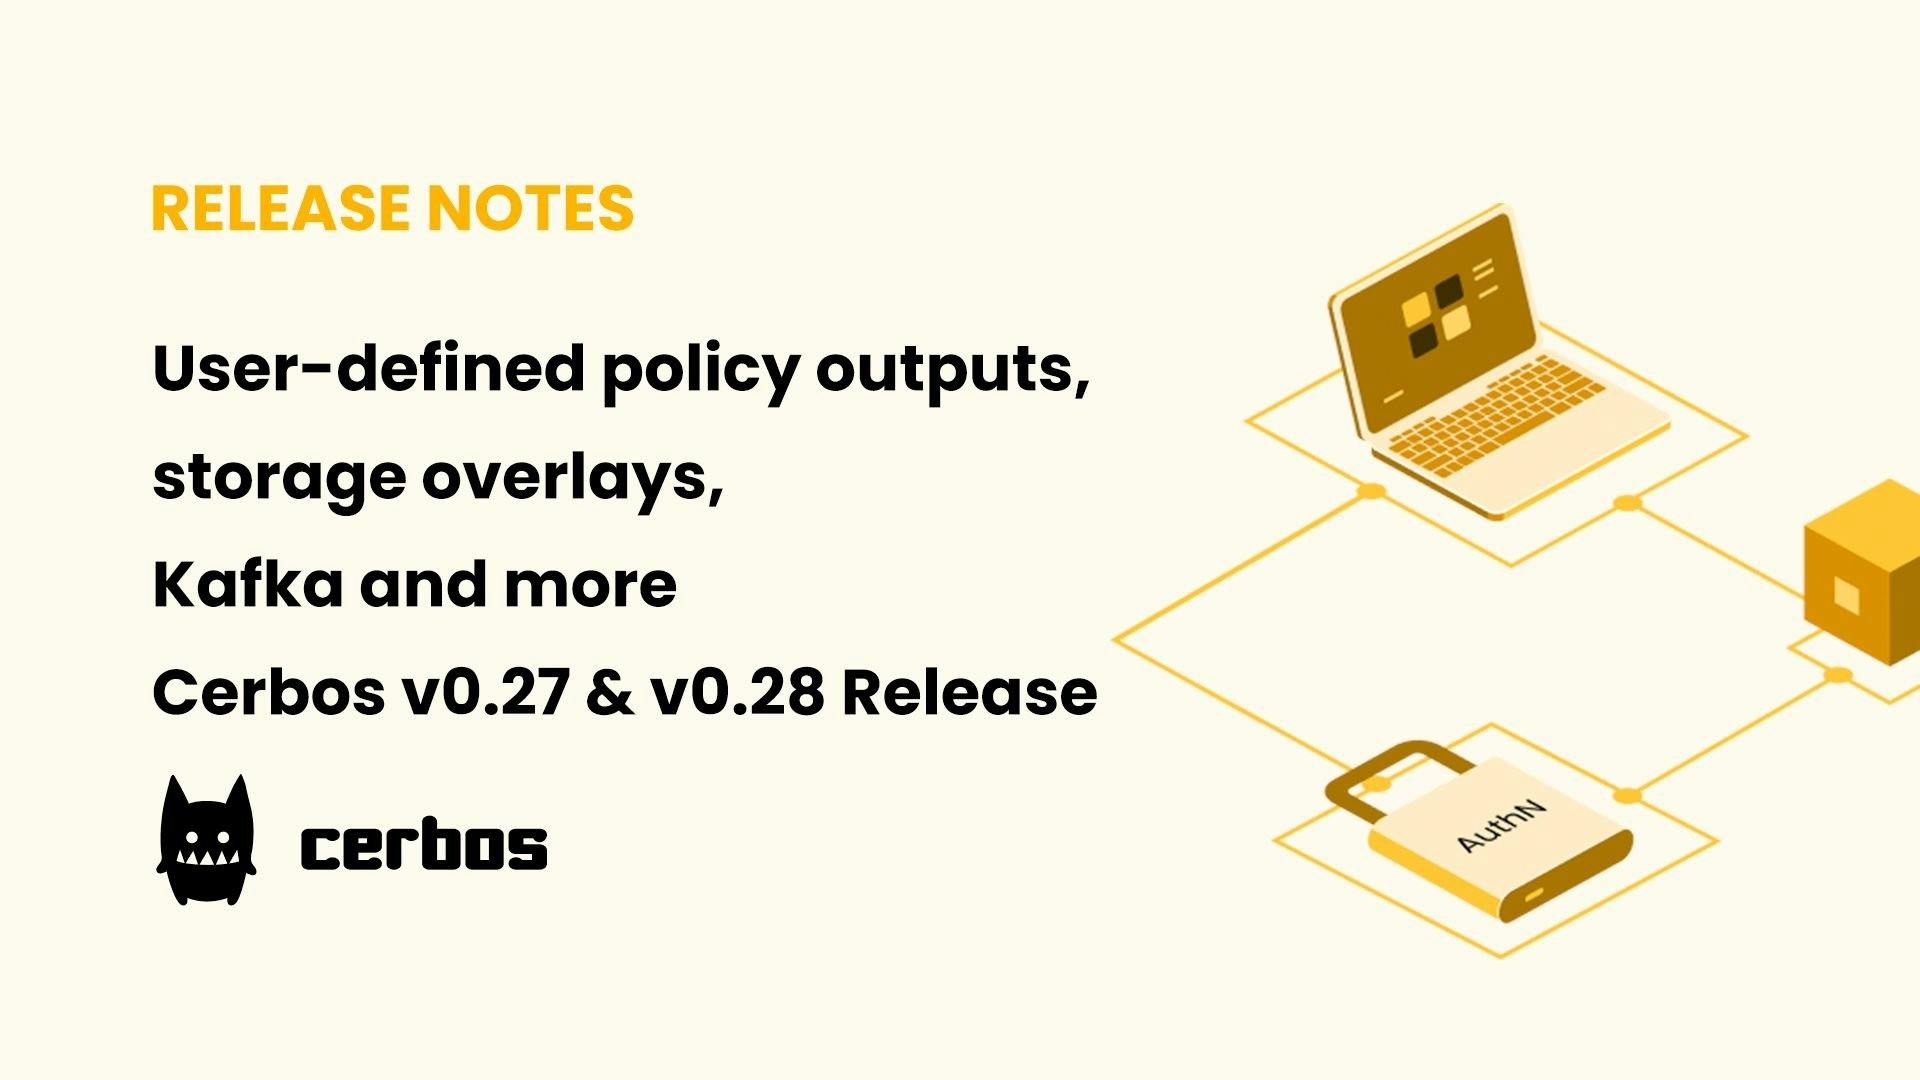 Policy outputs, storage overlays and more - Cerbos v0.27 & v0.28 Release